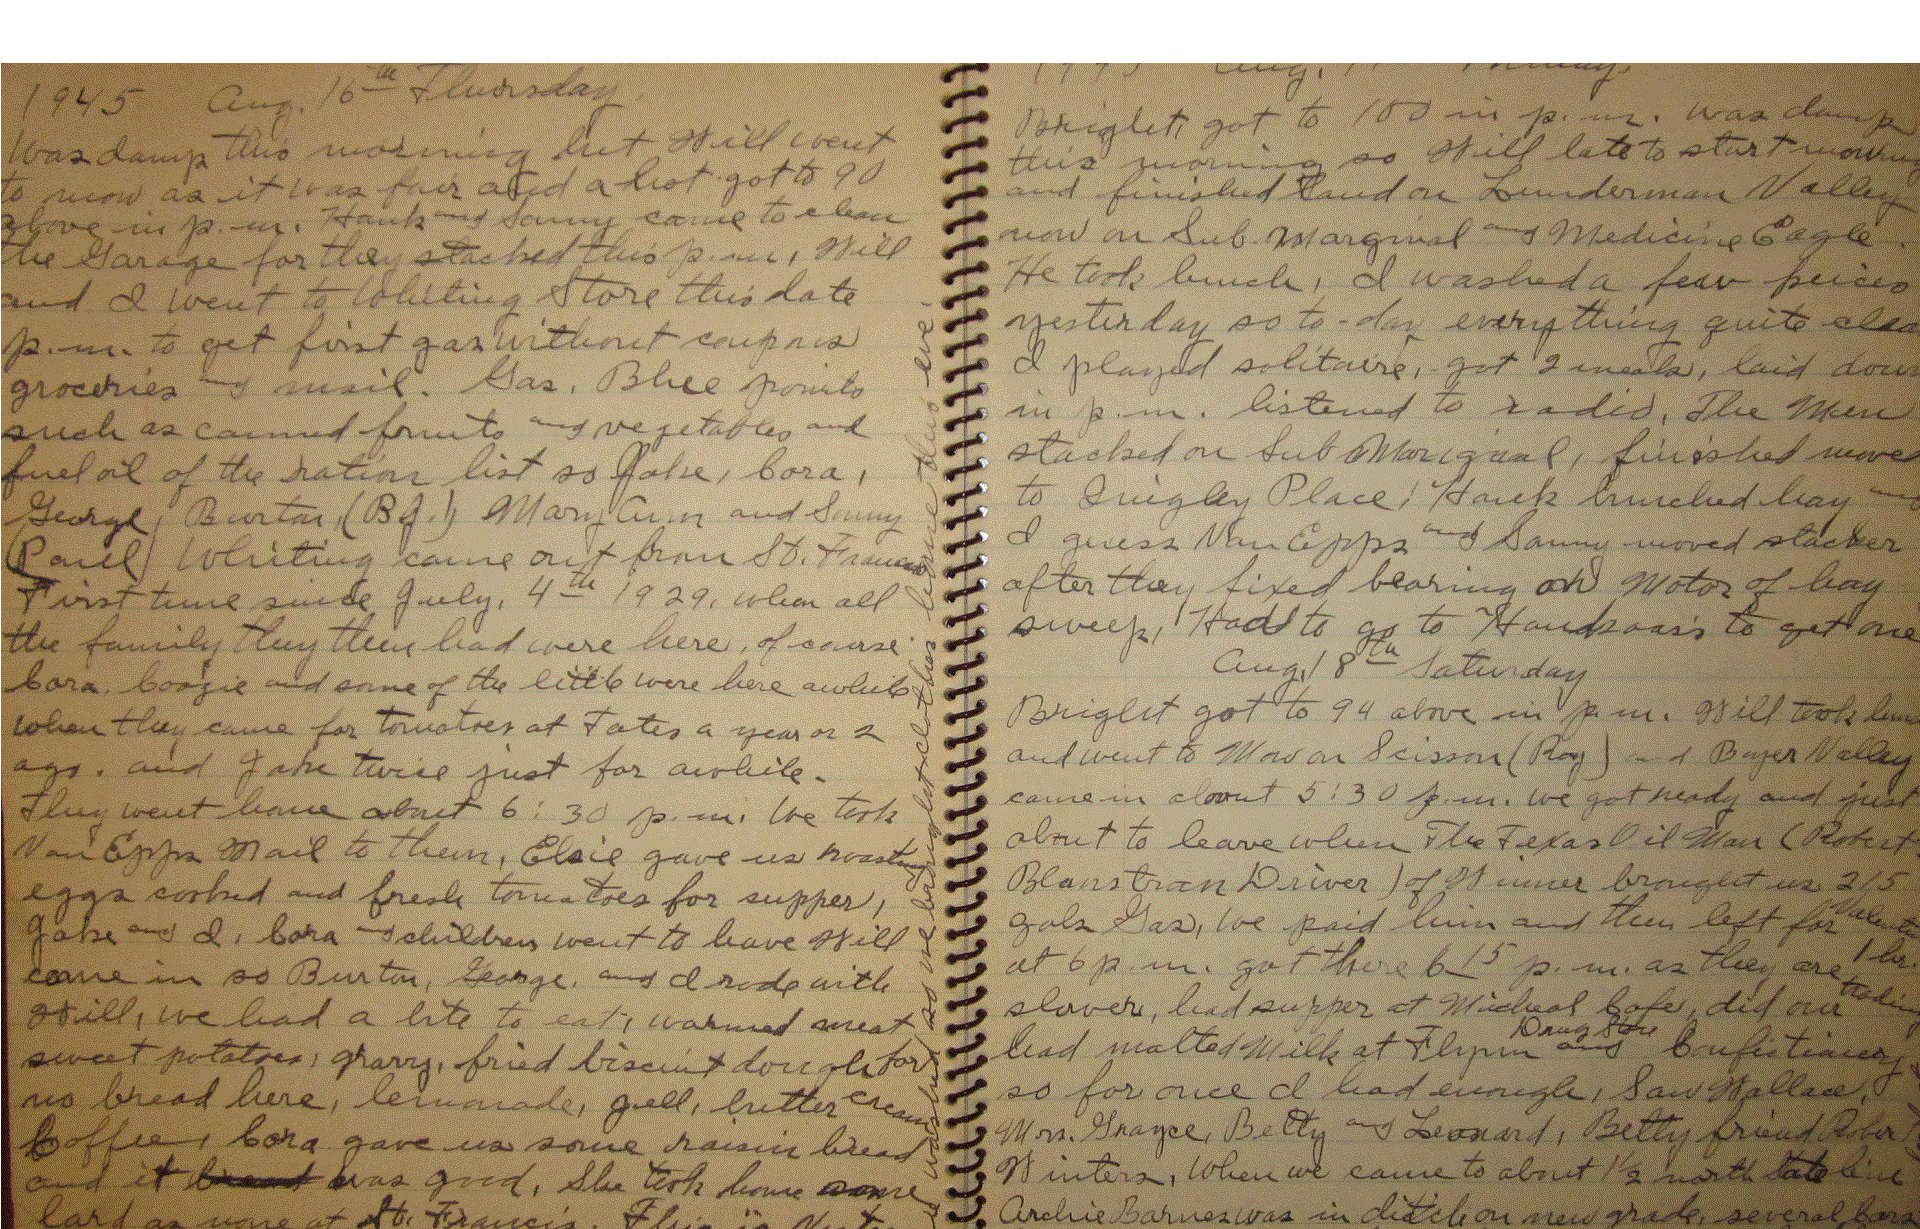 Diary pages. Дневник жизни два фон. Дневник Франклина. Diary background. Diary no background.